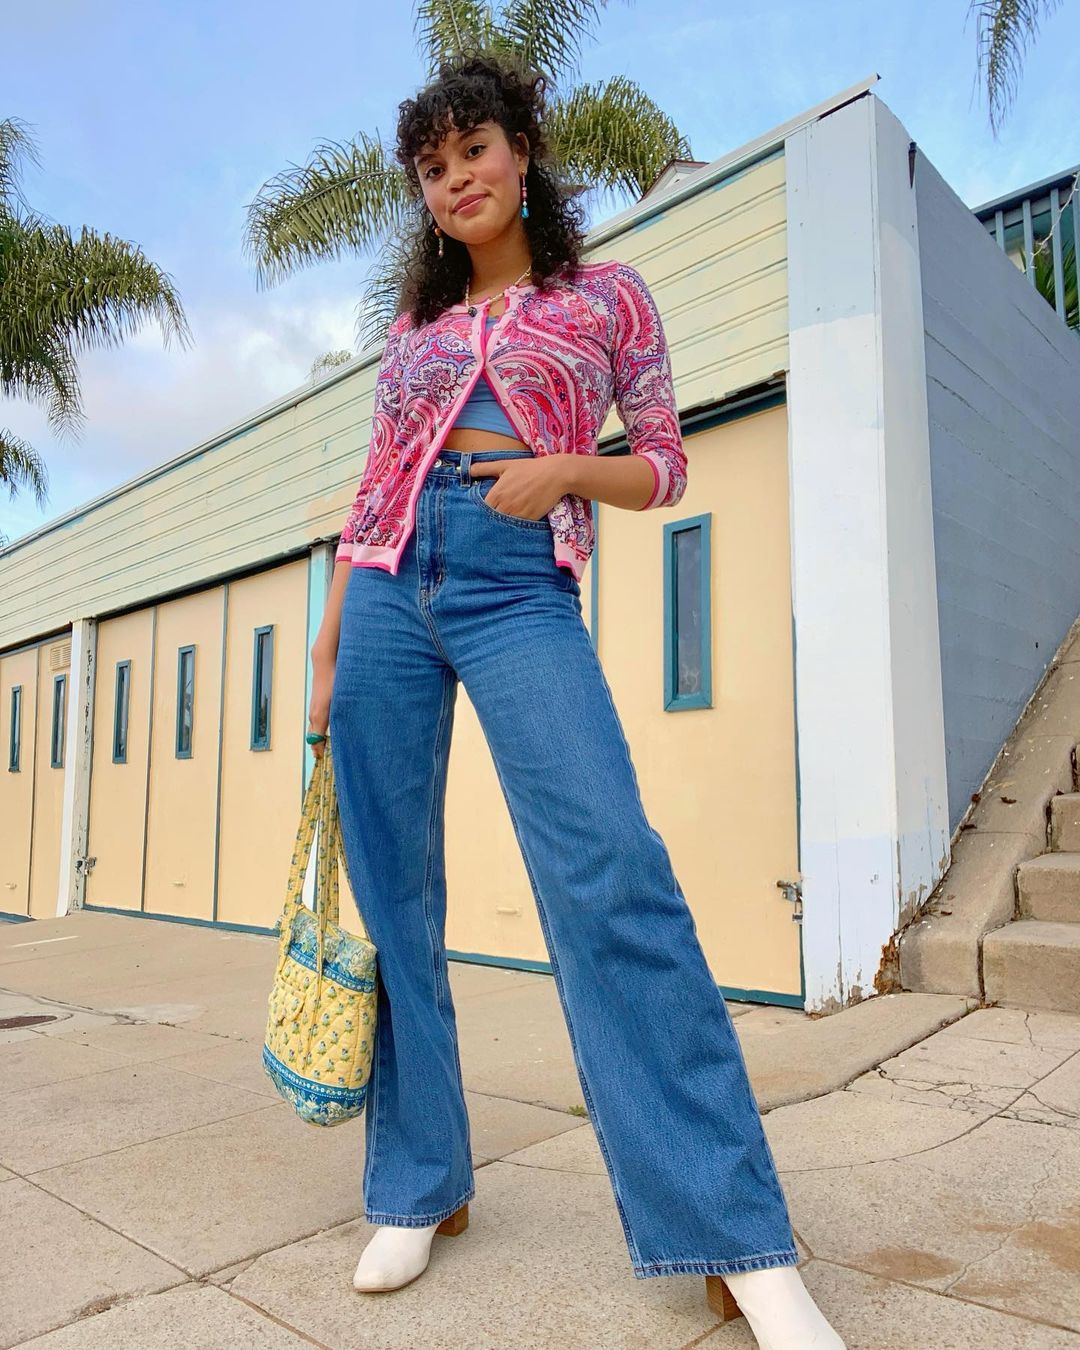 4 Shoe Styles to Wear with Flare Jeans That Look So Chic | Who What Wear